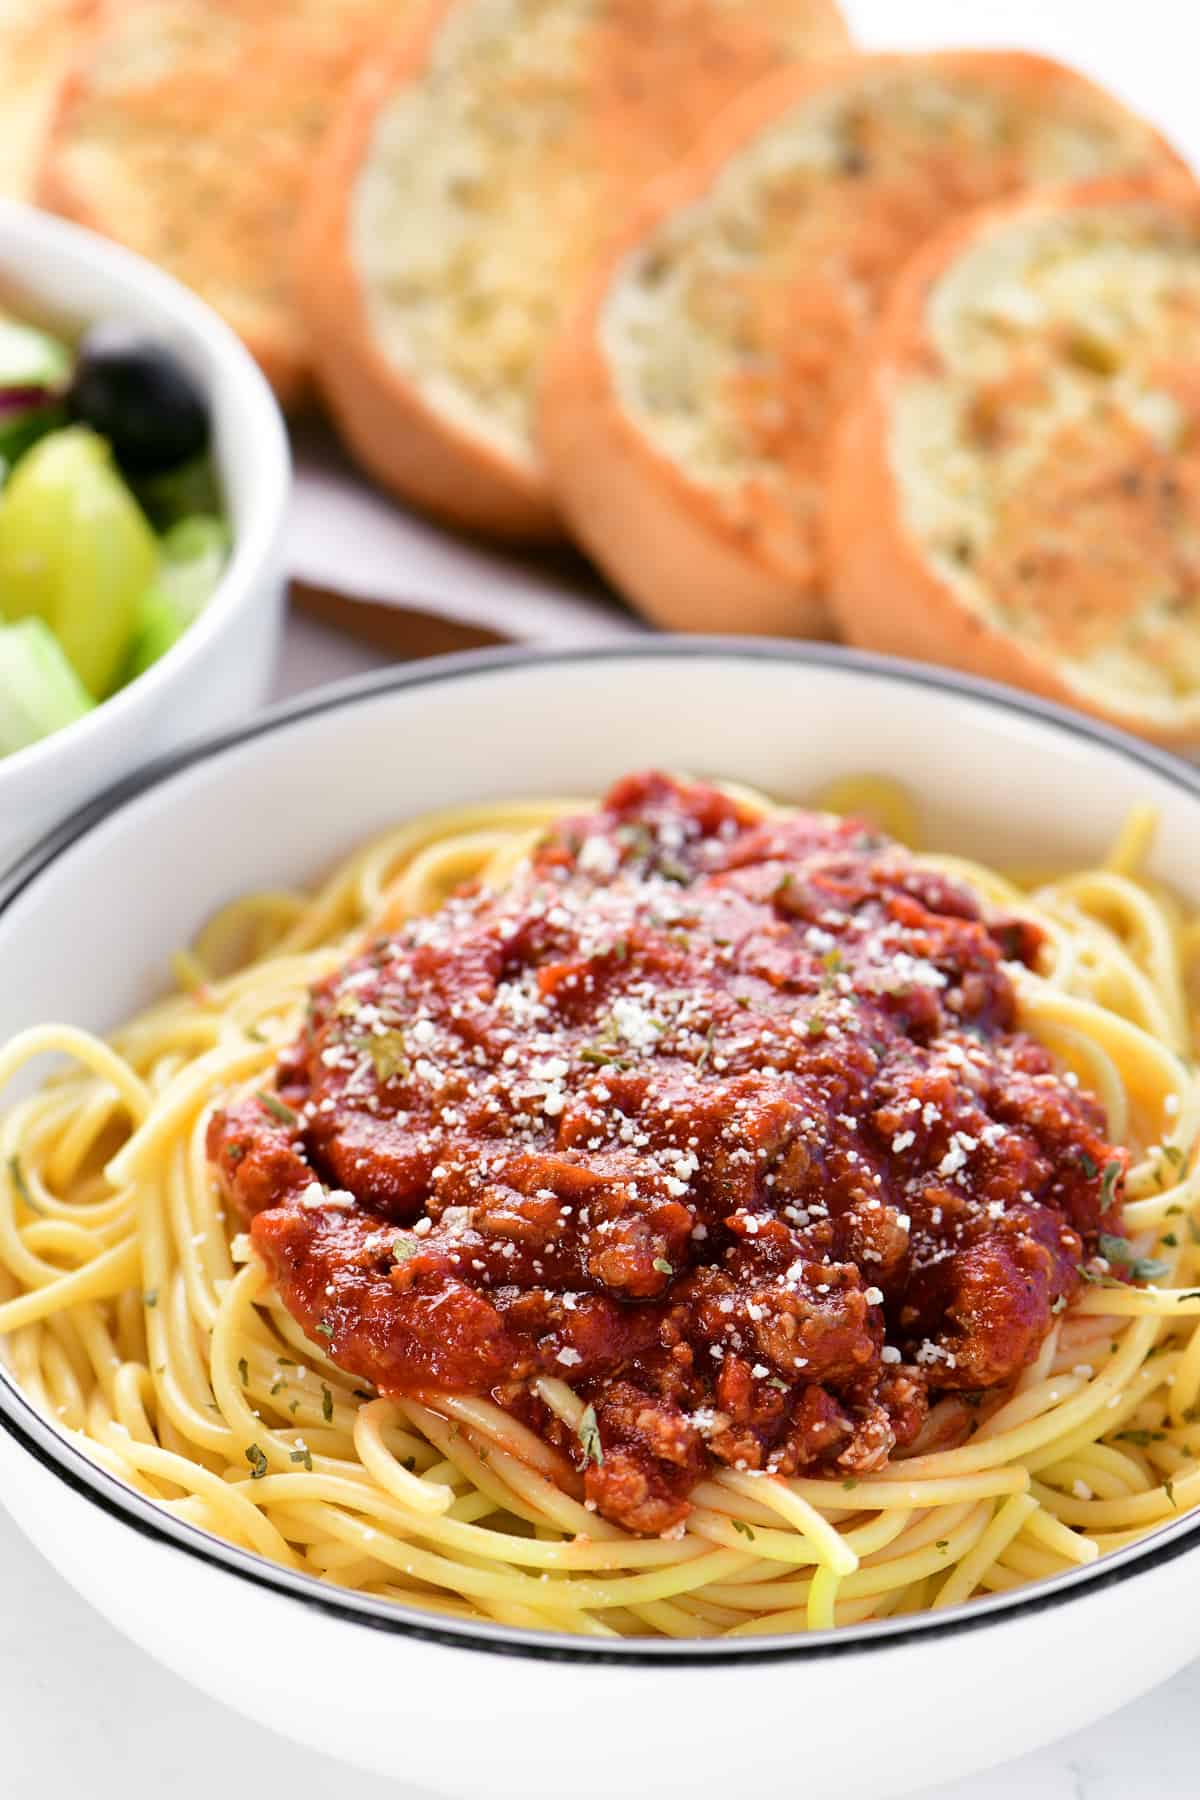 a bowl of noodles with Spaghetti sauce.